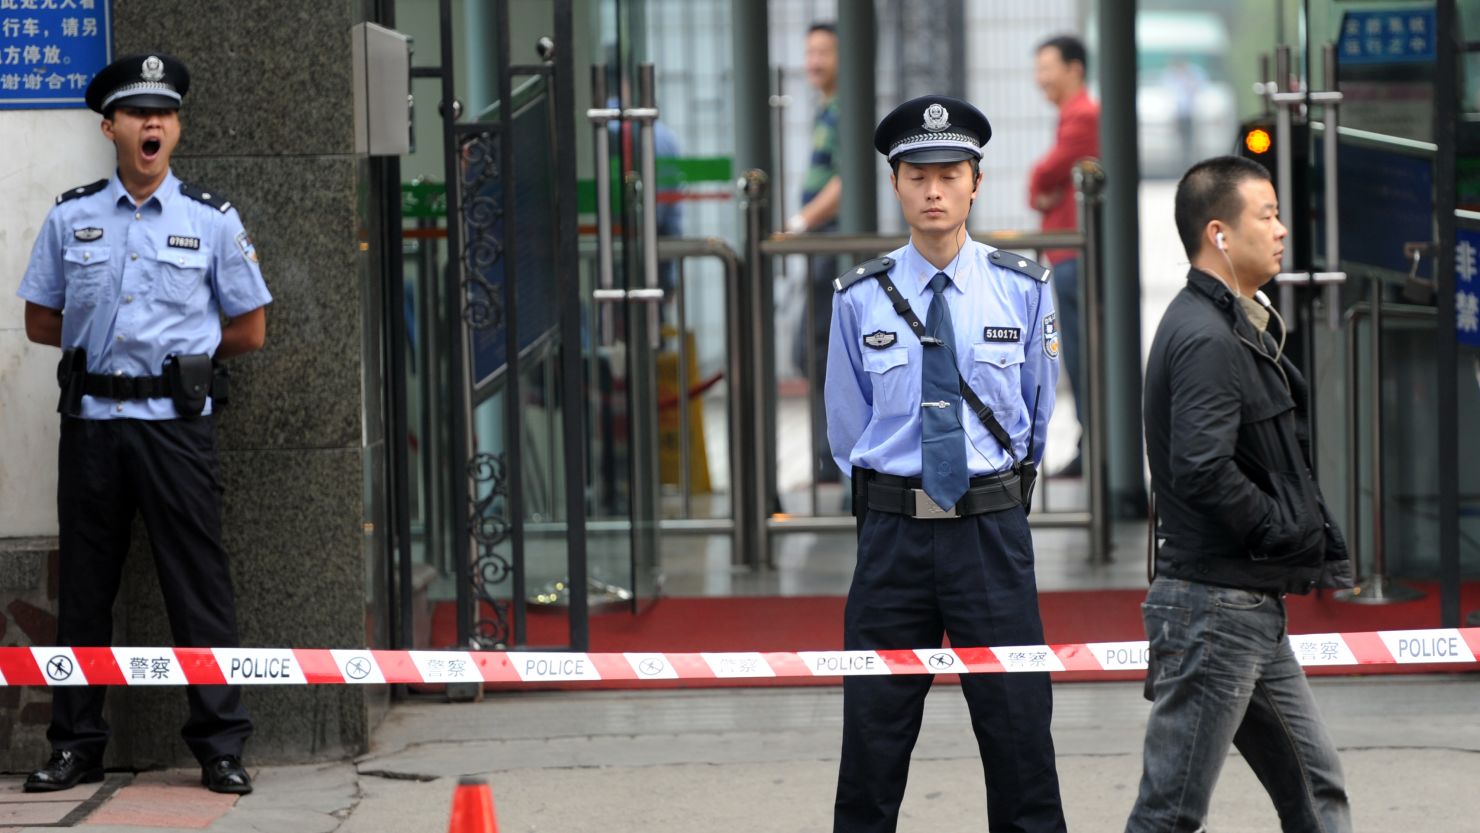 Chinese policemen stand guard outside the Chengdu People's Intermediate in Sichuan province on September 18, 2012.